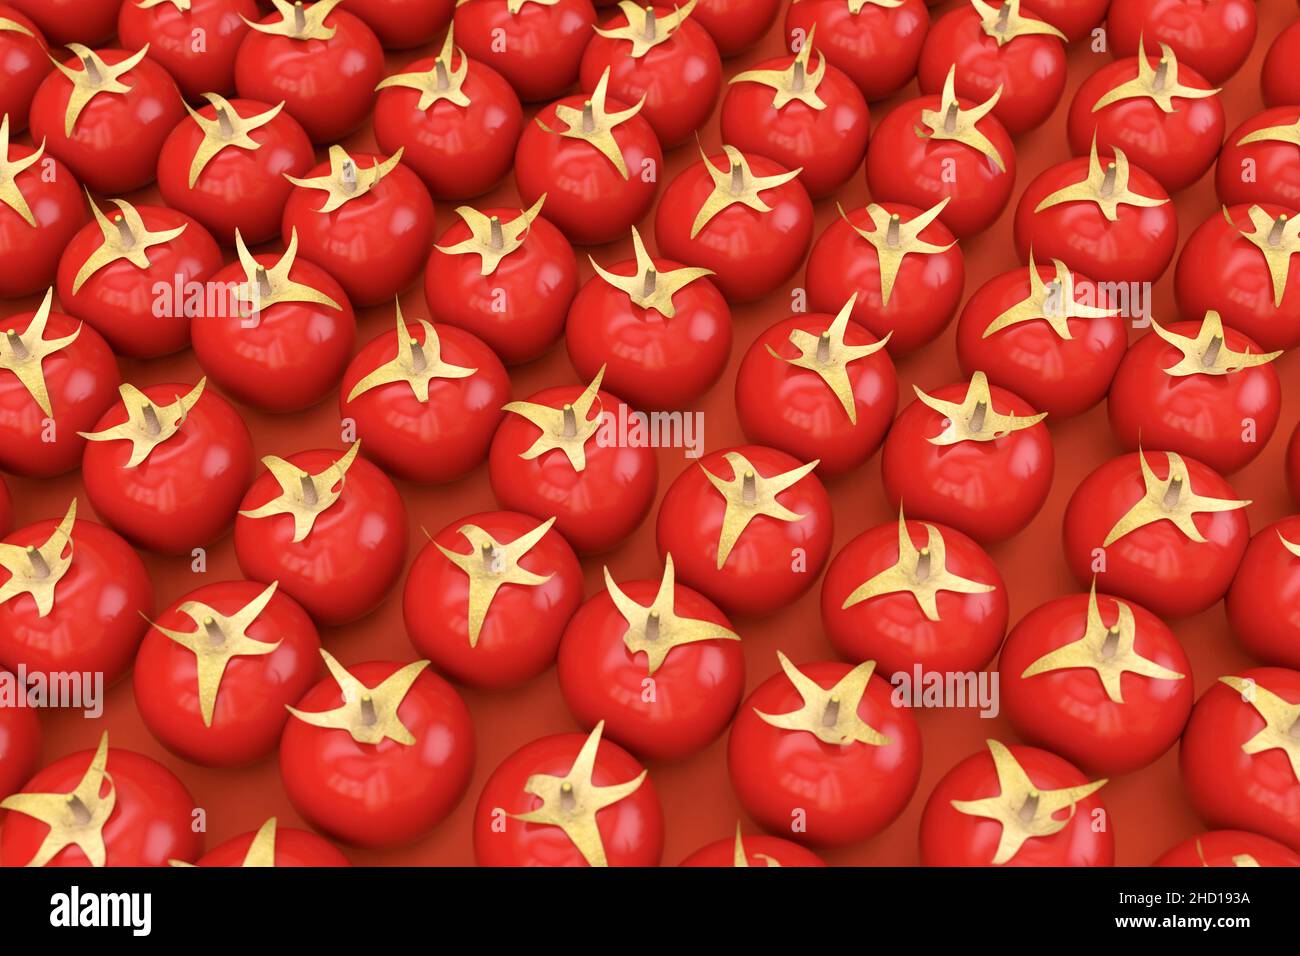 Huge amount of red tomatoes on a red isolated background. Red ripe tomatoes lie next to each other. 3D realistic models of tomatoes. 3D graphics, clos Stock Photo